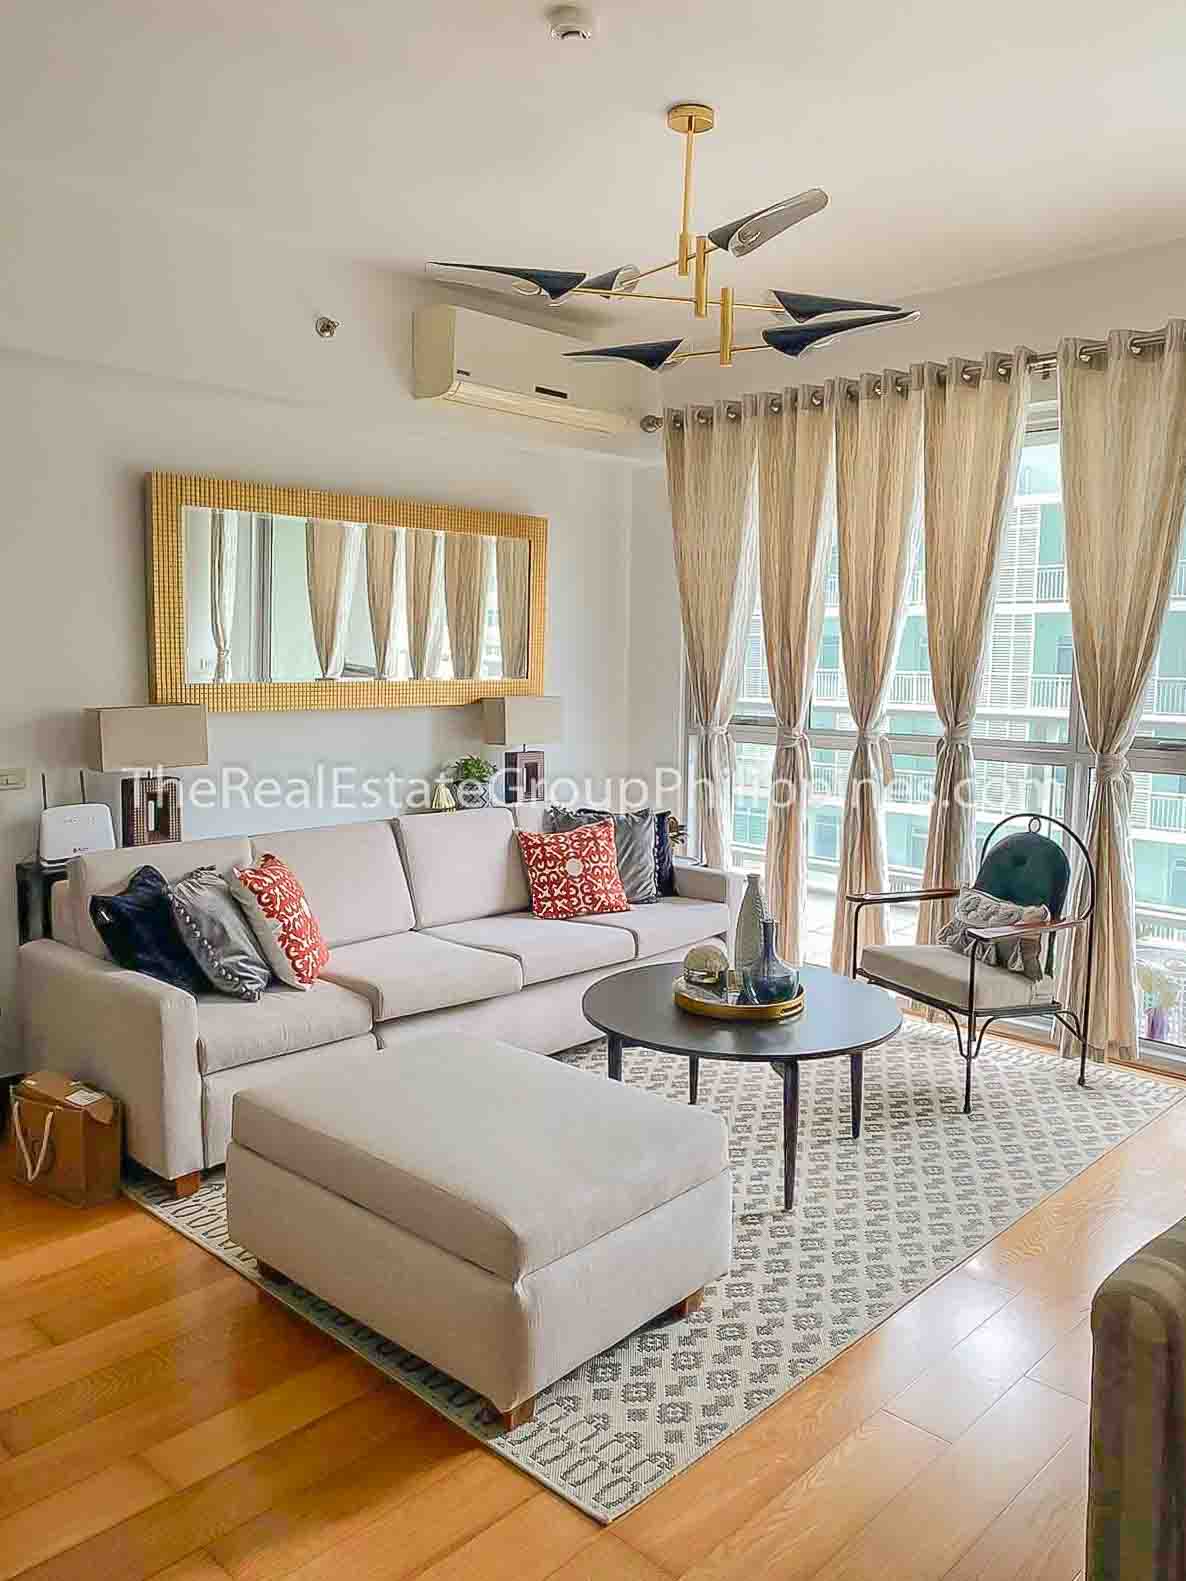 1BR Condo For Rent, East Tower, One Serendra, BGC 14E-4